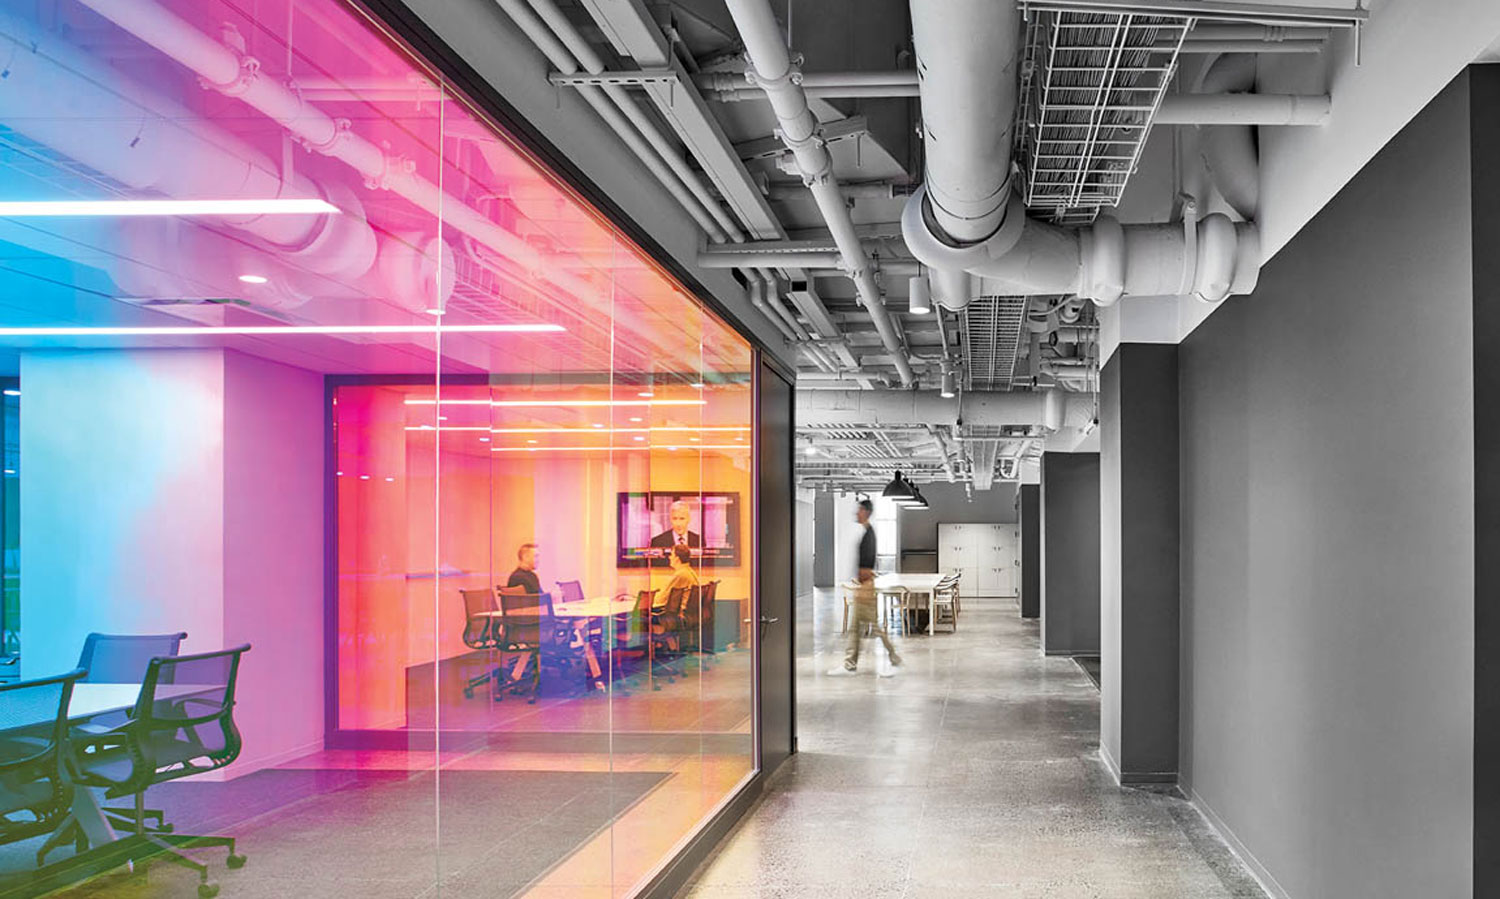 Dichroic glass adding color to the monochrome palette at Verizon’s in-house agency